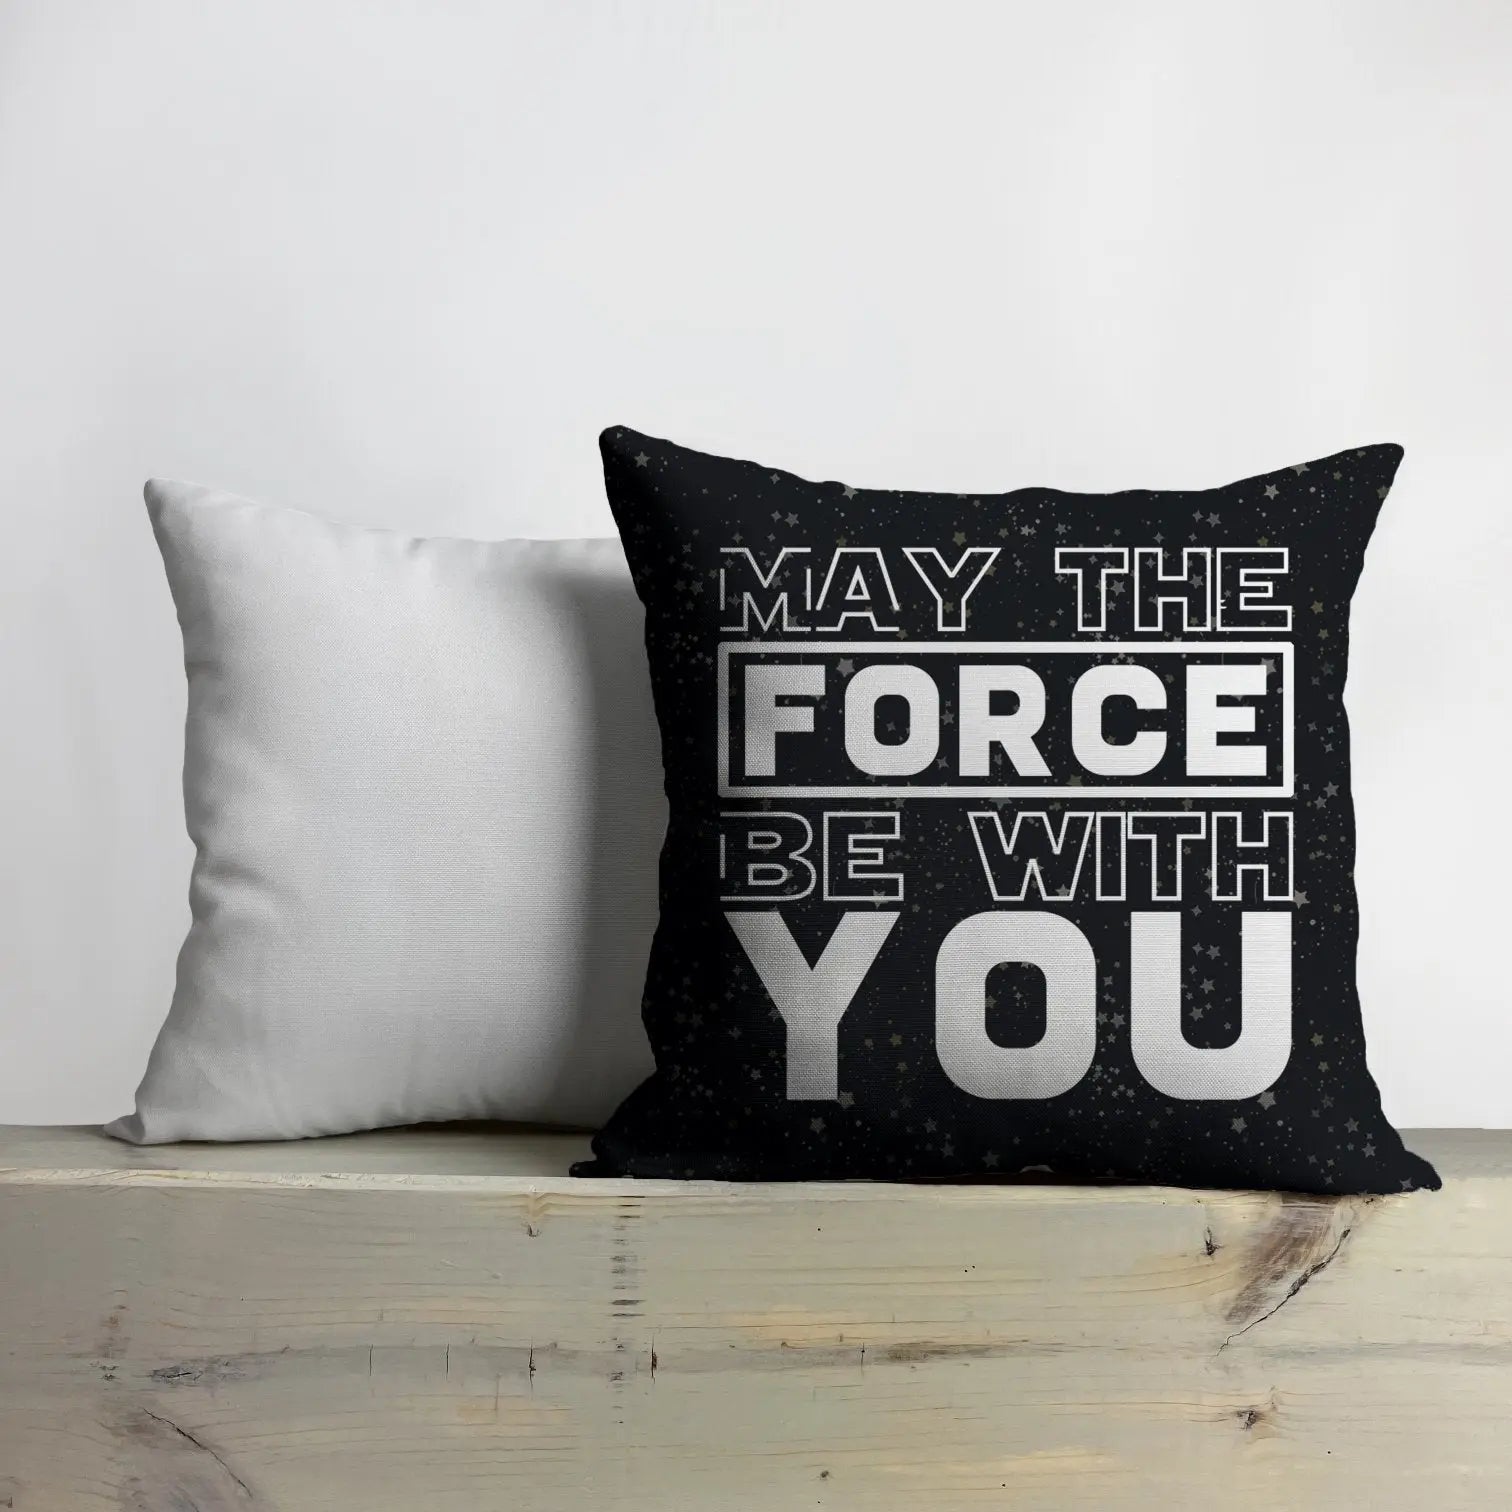 The Force is with You, Pillow Cover, Movie Saying, Throw Pillow, Kids  Room Boys Gift, Throw Pillow, Home Decor, Bedroom Decor